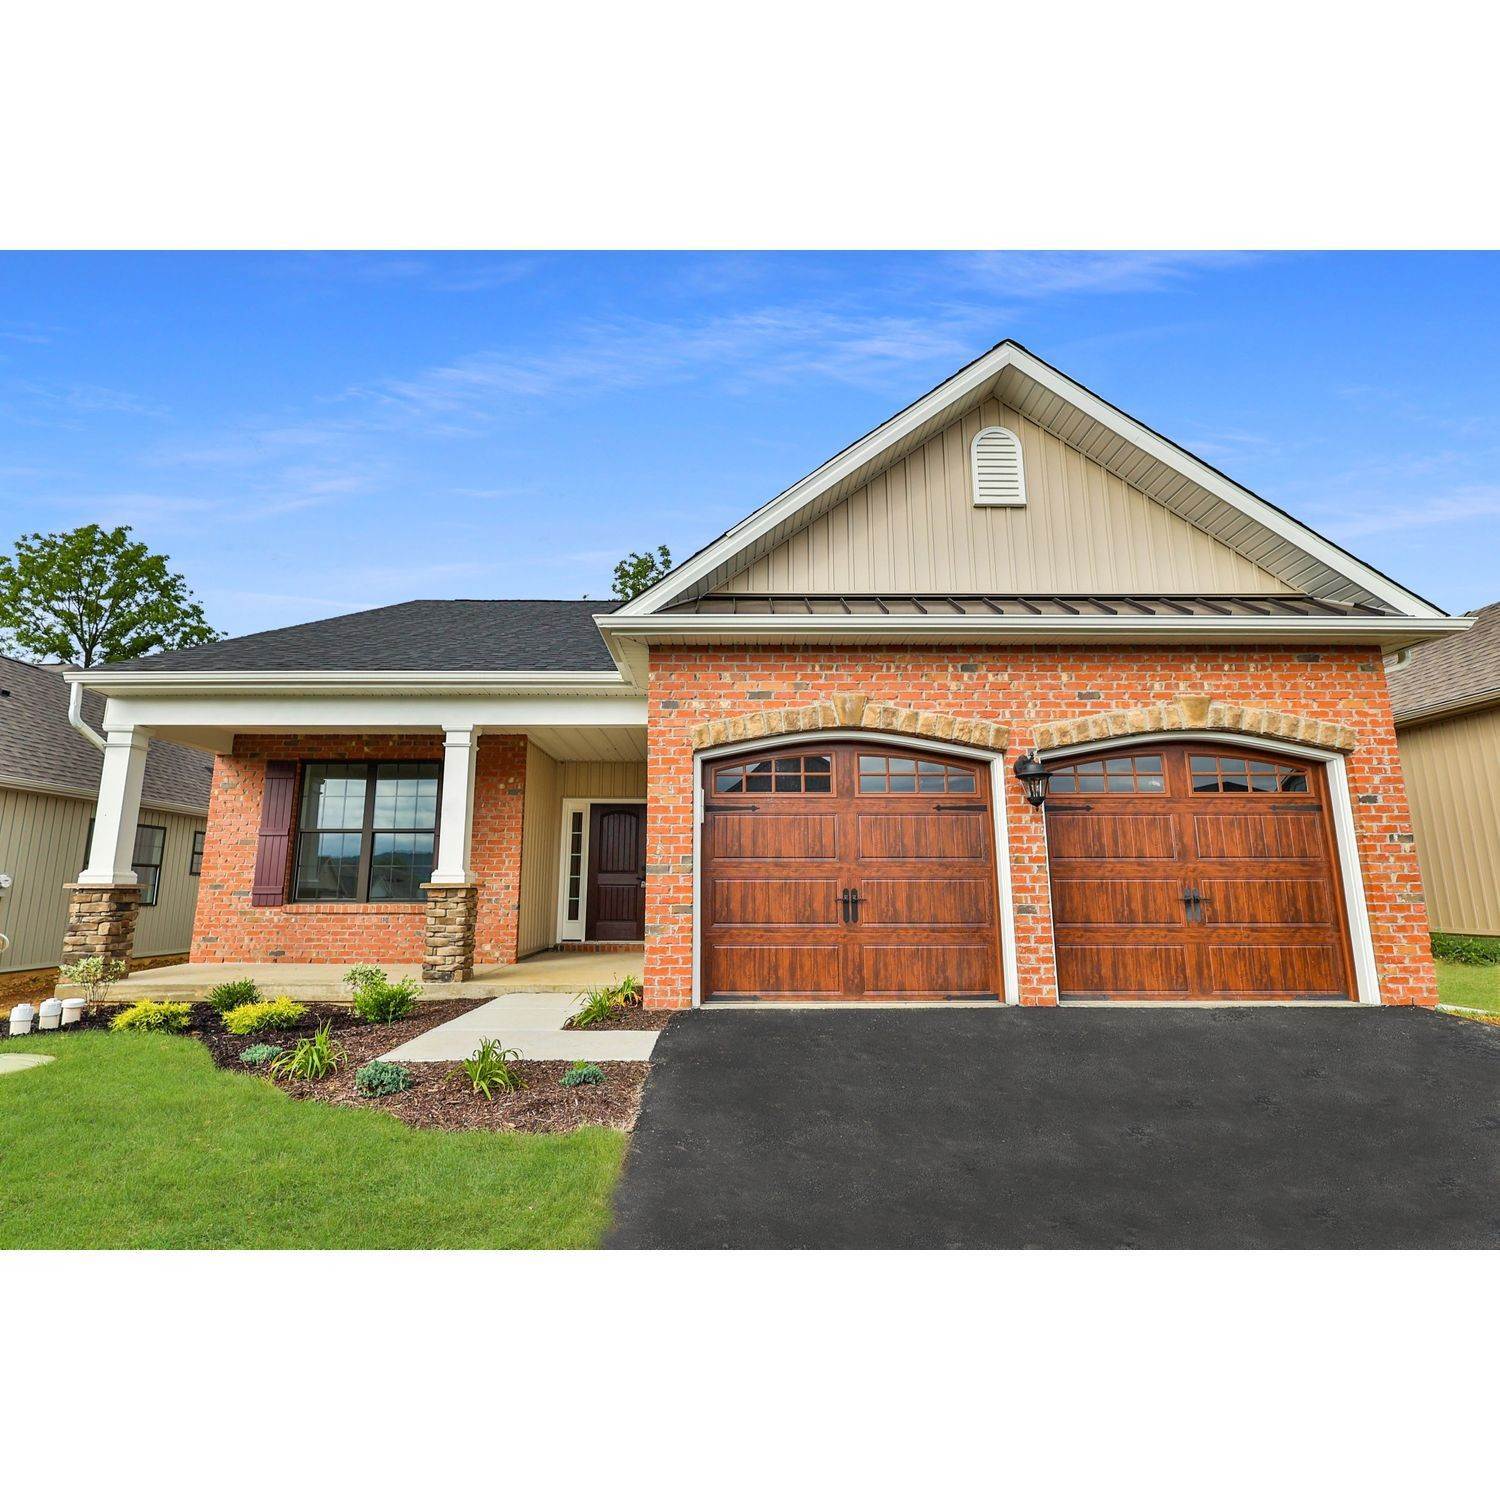 Single Family for Sale at The Fields At Indian Creek 3440 Gentlewind Way, Emmaus, PA 18049